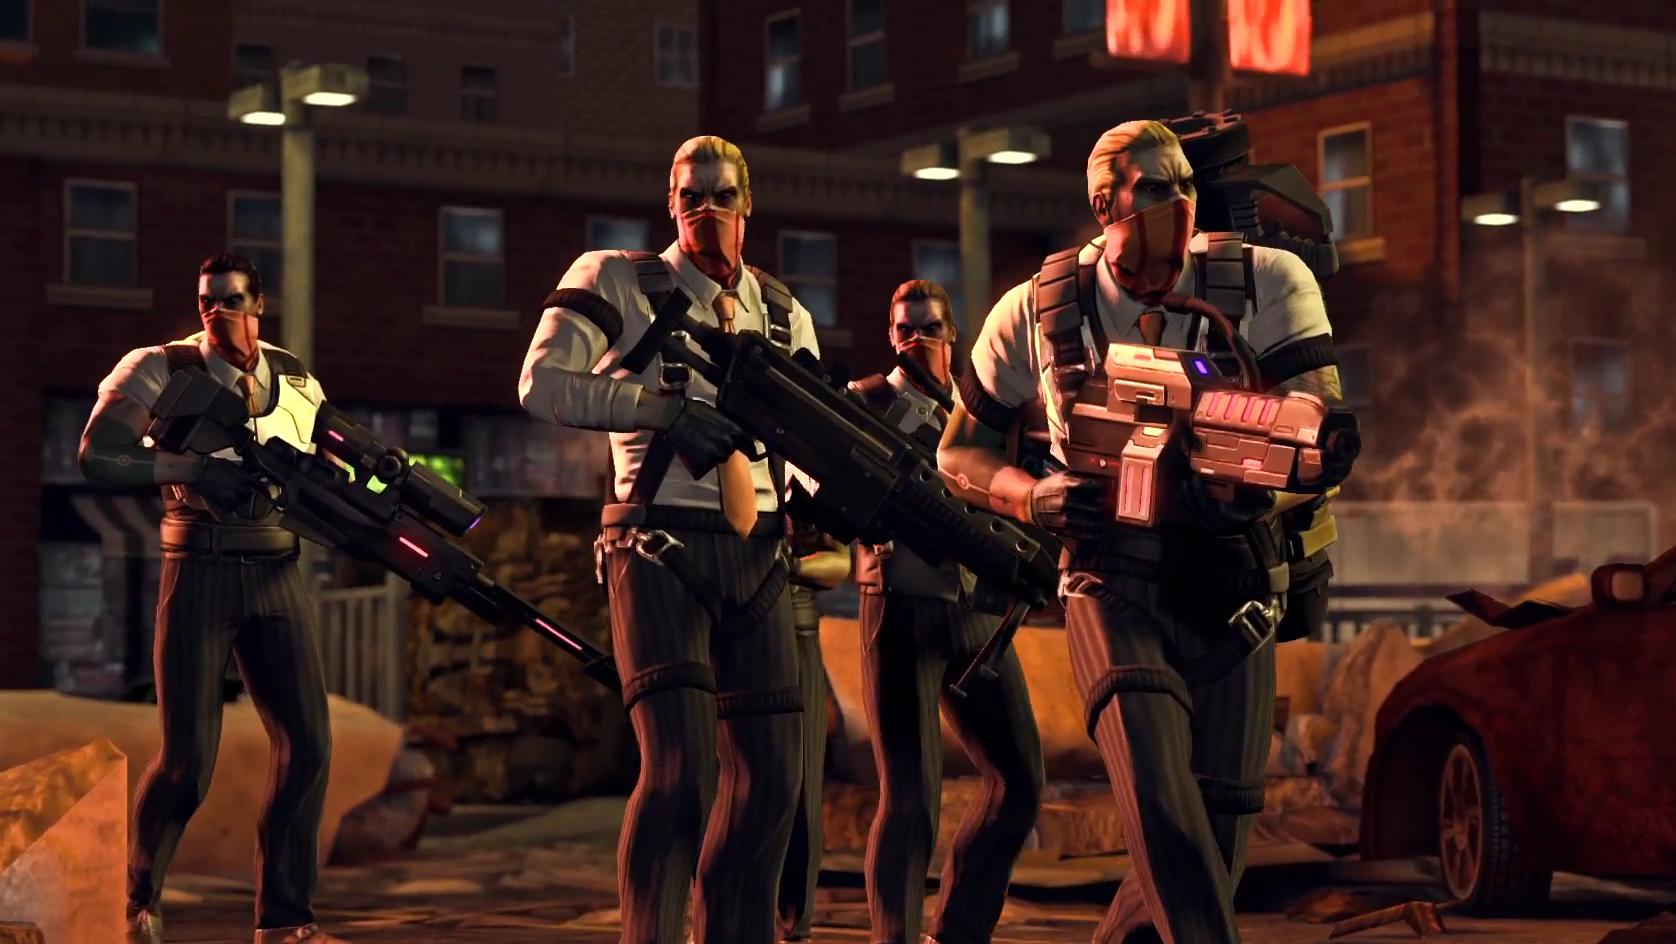 XCOM-Enemy-Within-Official-Security-Breach-Trailer_2.jpg